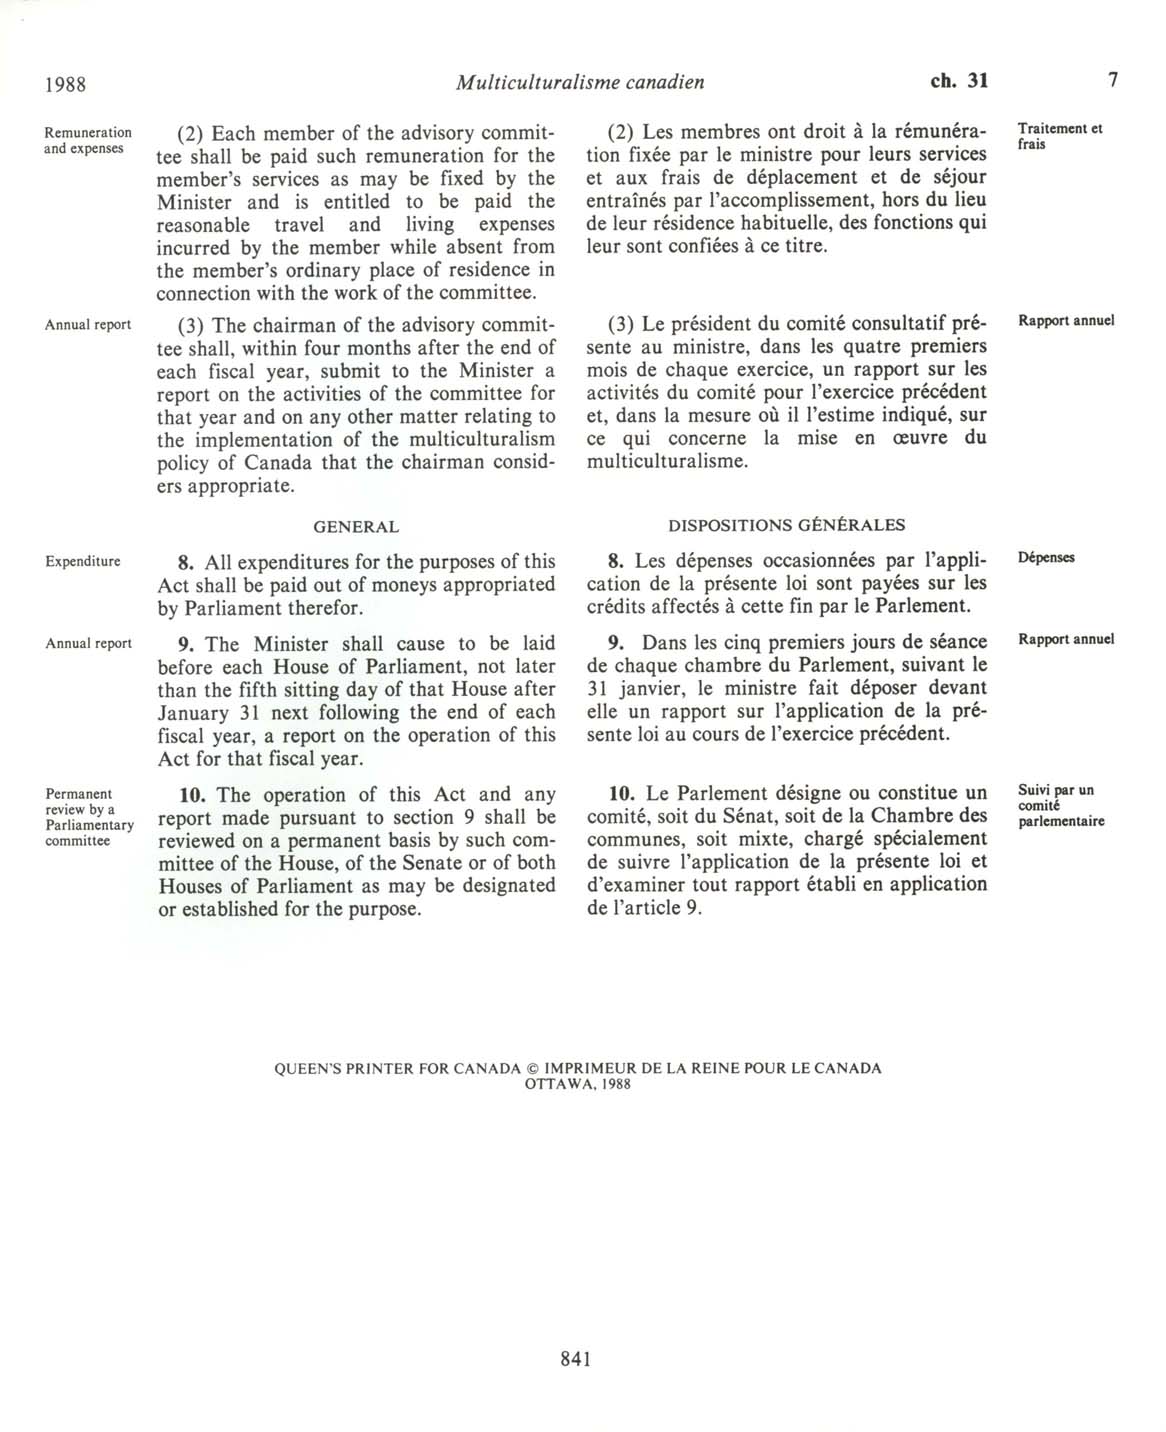 Page 841 Canadian Multiculturalism Act, 1988